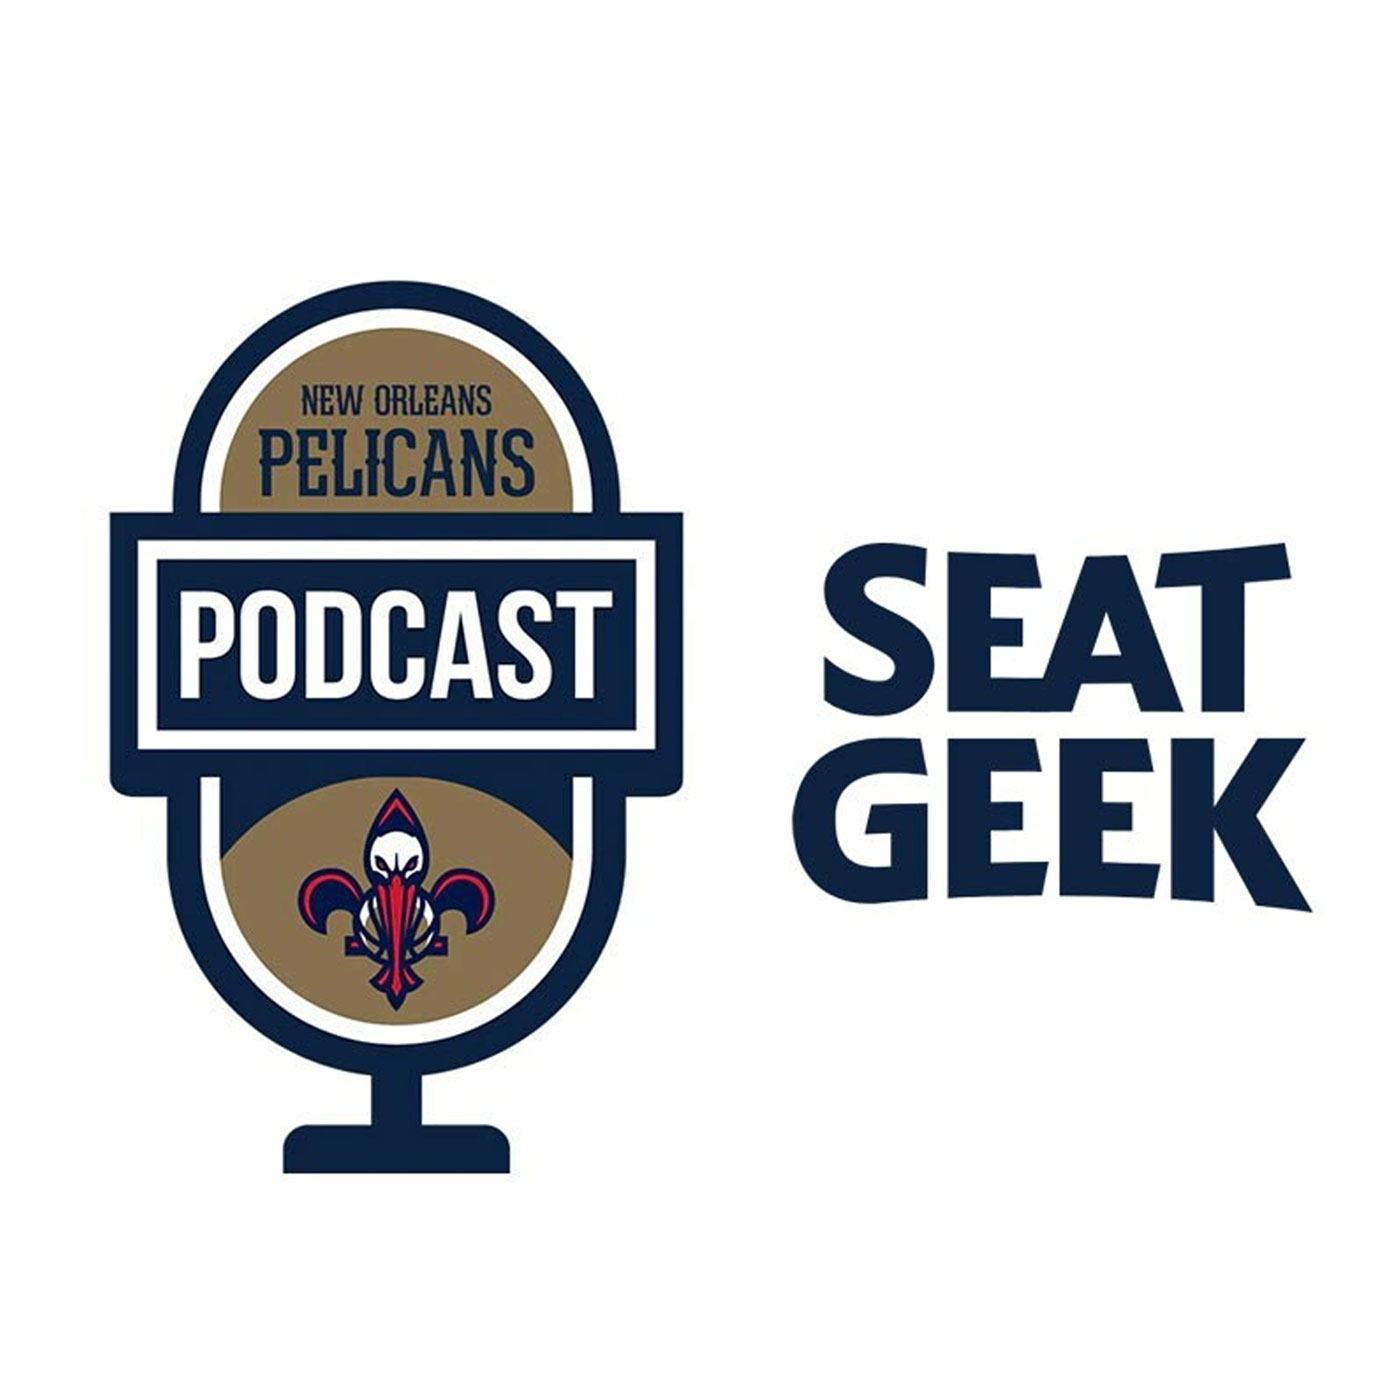 Marc Spears on the New Orleans Pelicans Podcast presented by SeatGeek - April 22, 2022